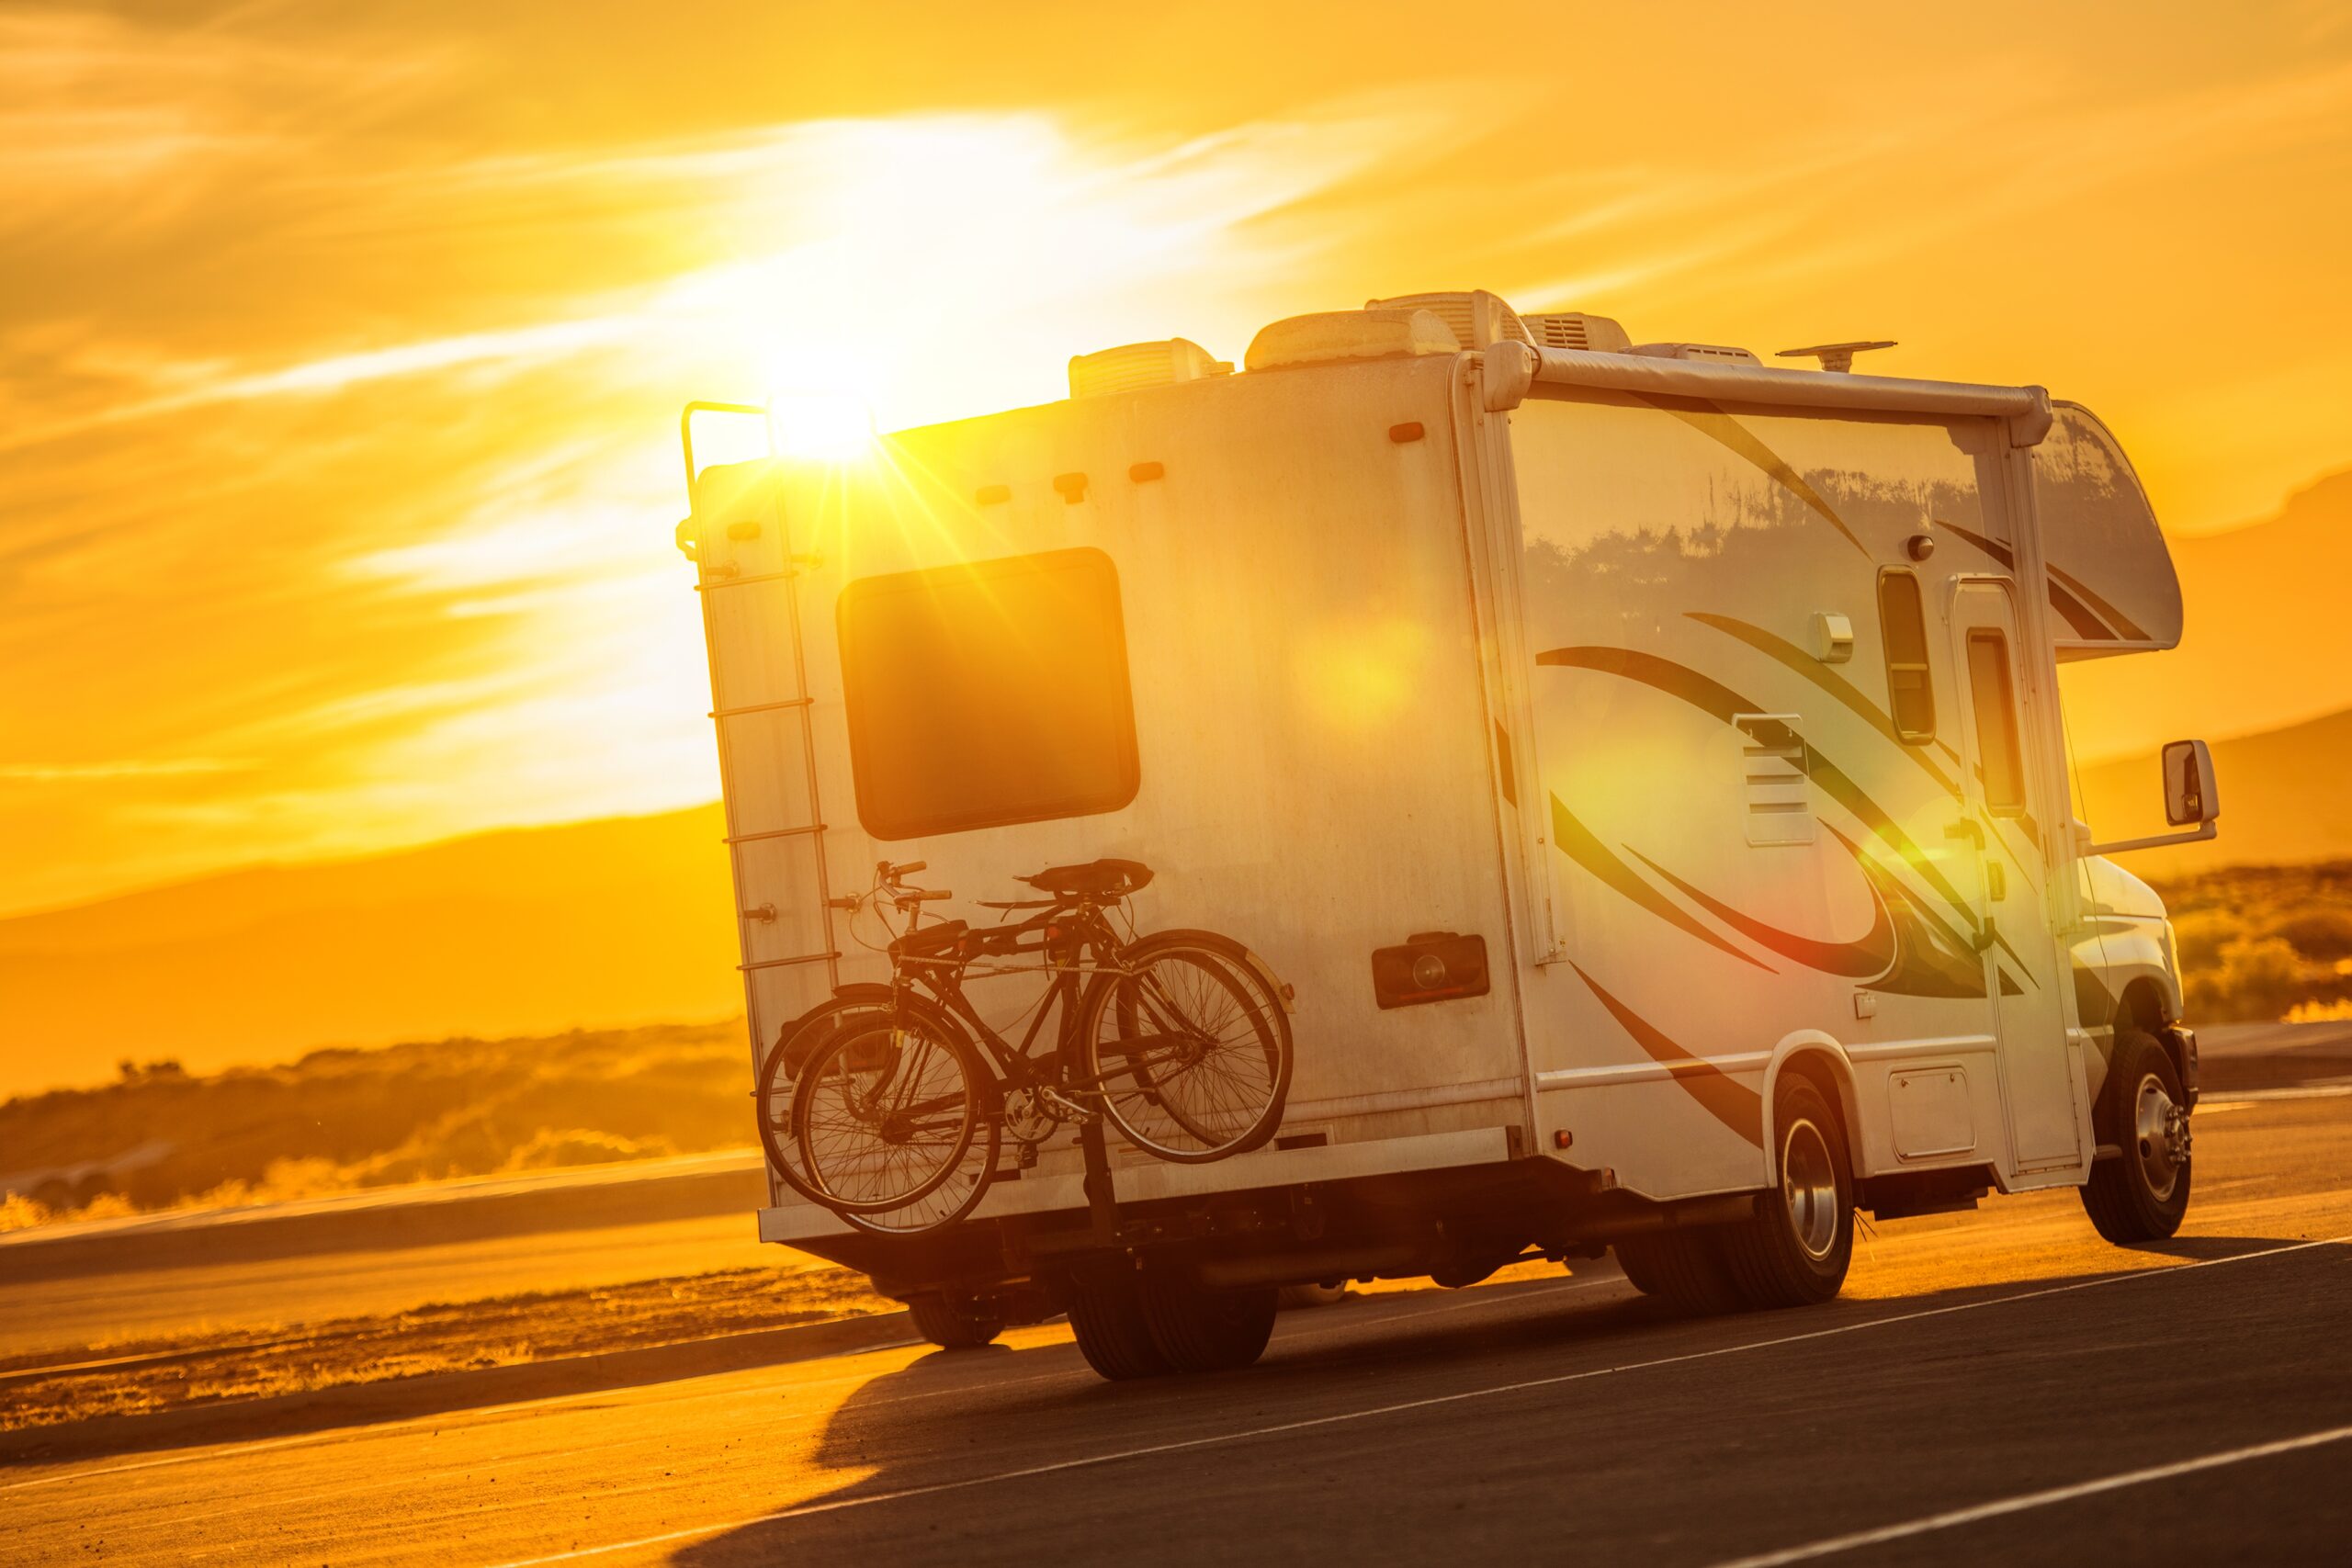 RV Camper Boondocking on the Public Parking. Recreational Vehicle Traveling .